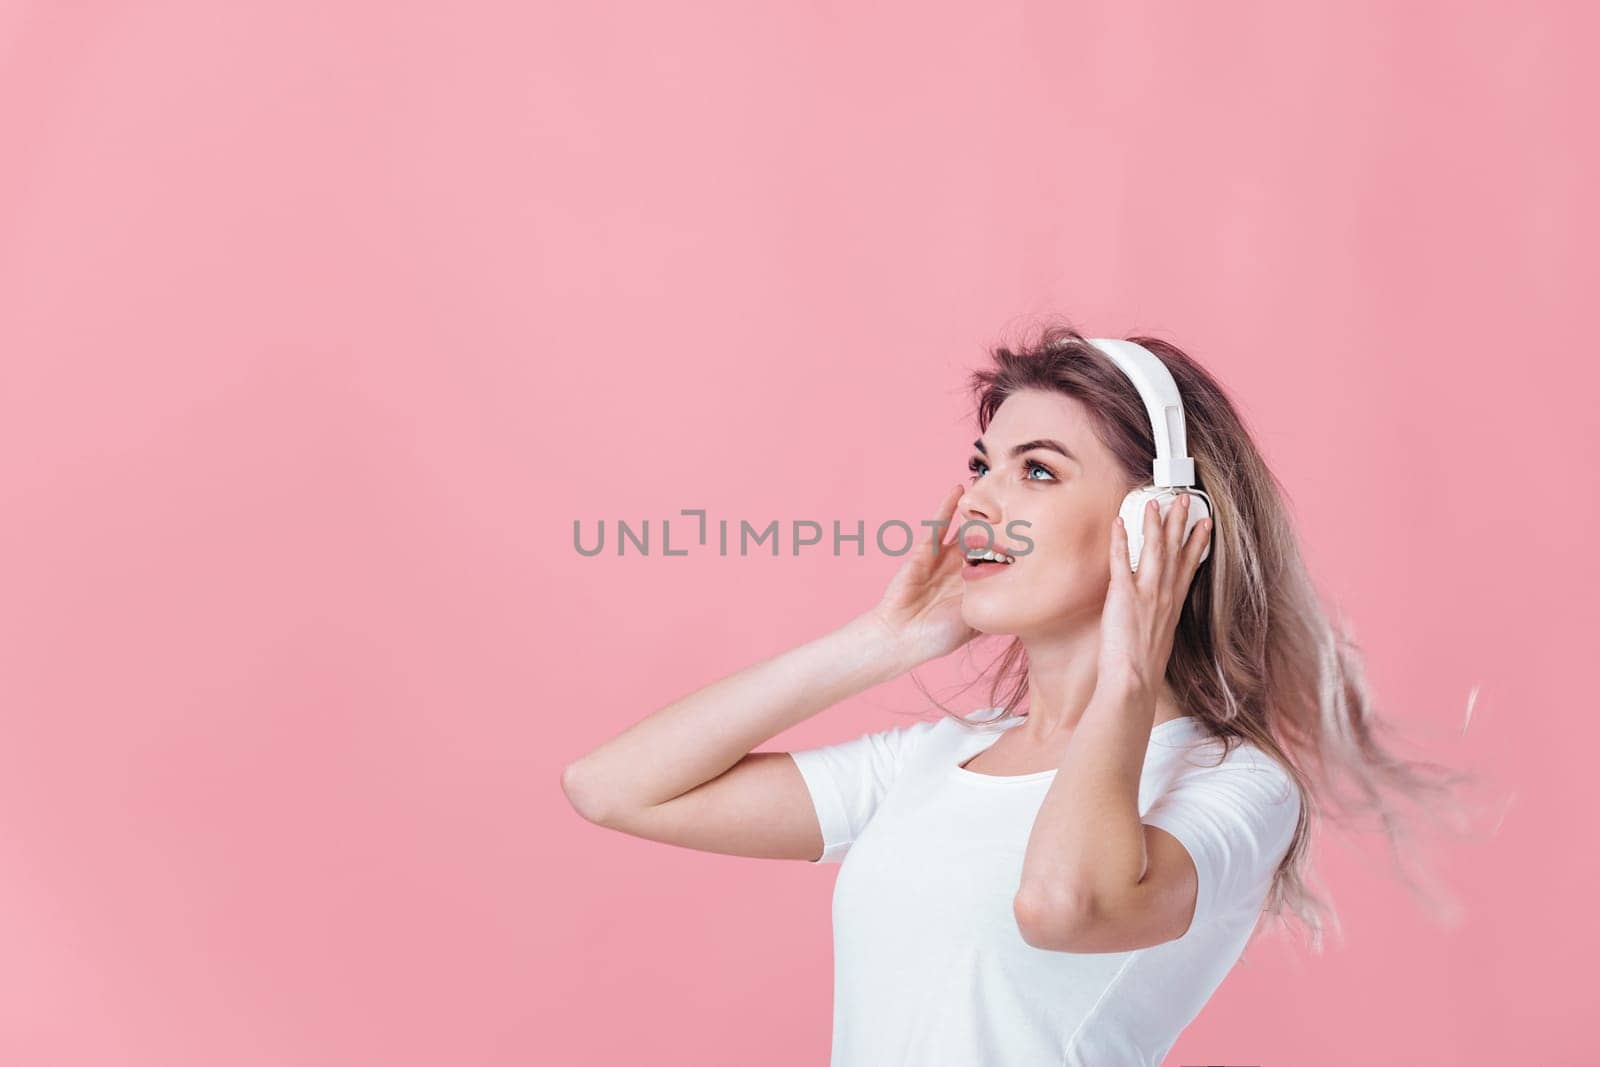 beautiful smiling blonde woman in t-shirt and white headphones listens to music on pink background